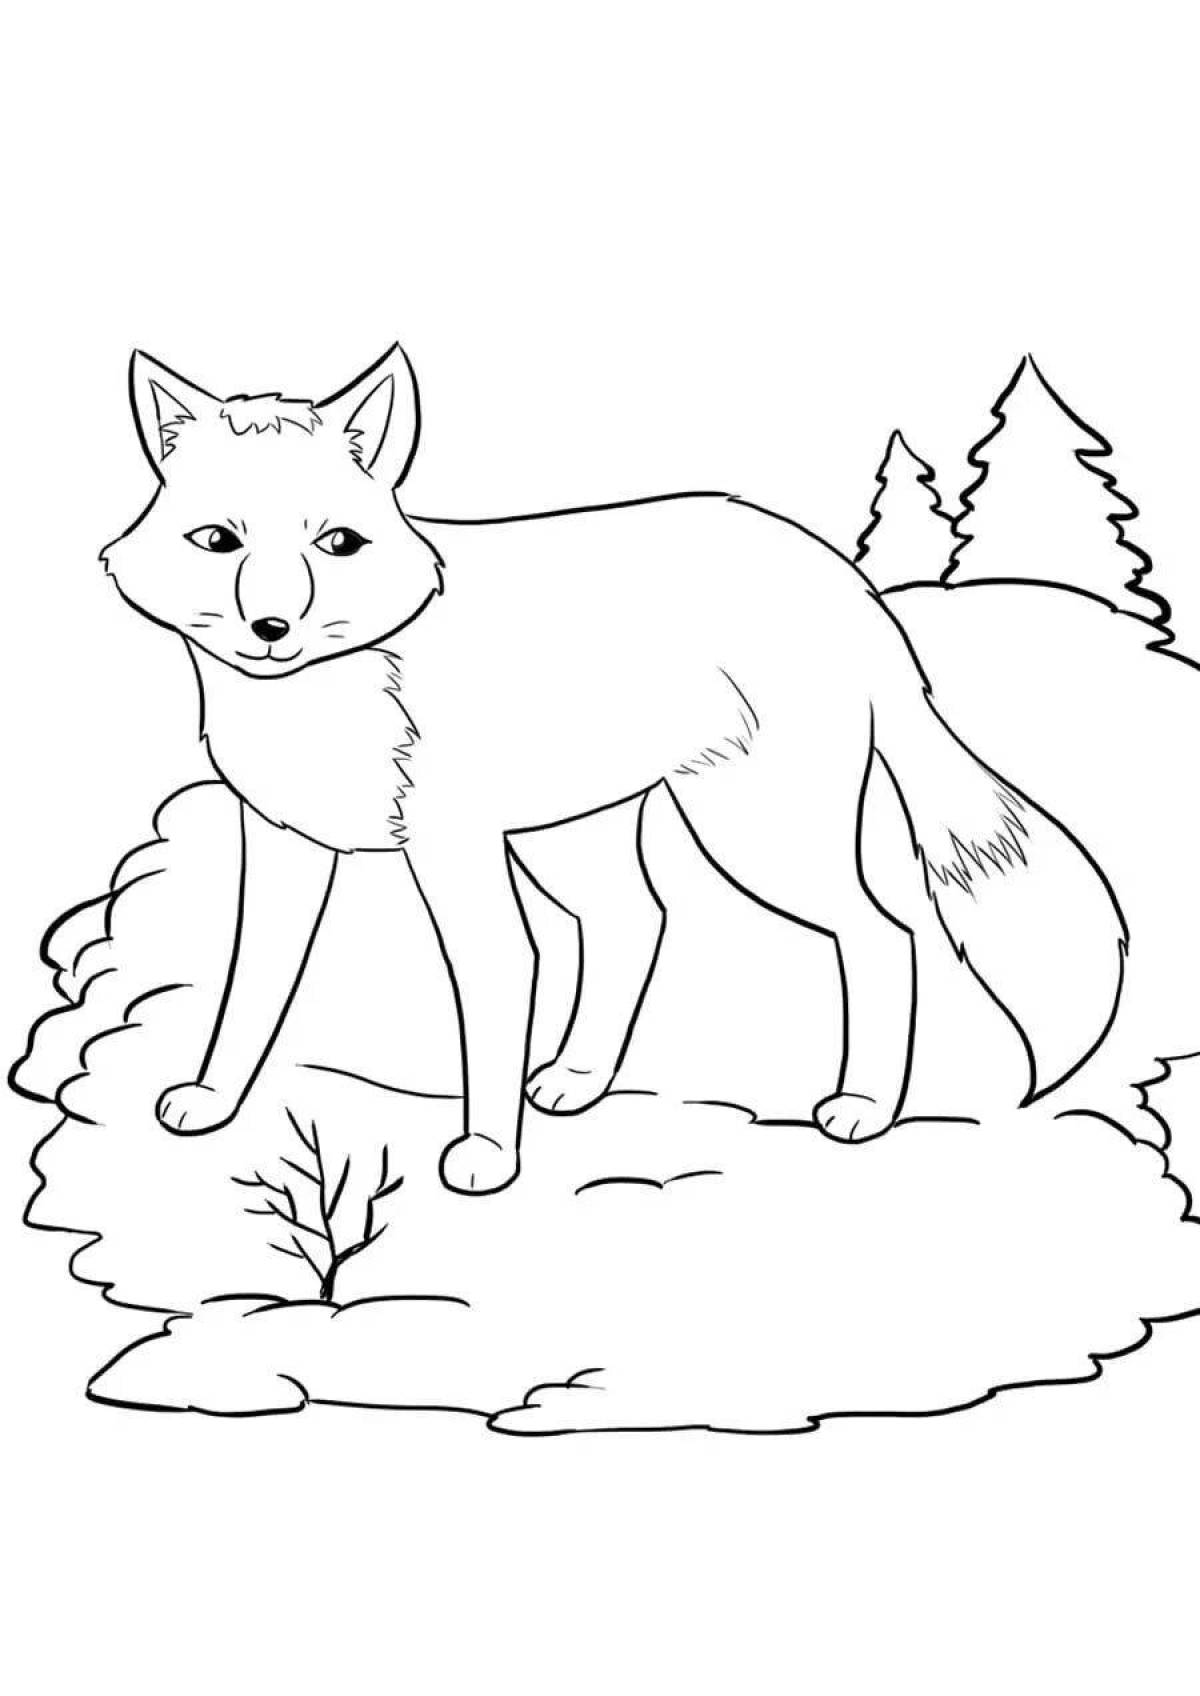 Amazing animal coloring pages in the winter forest